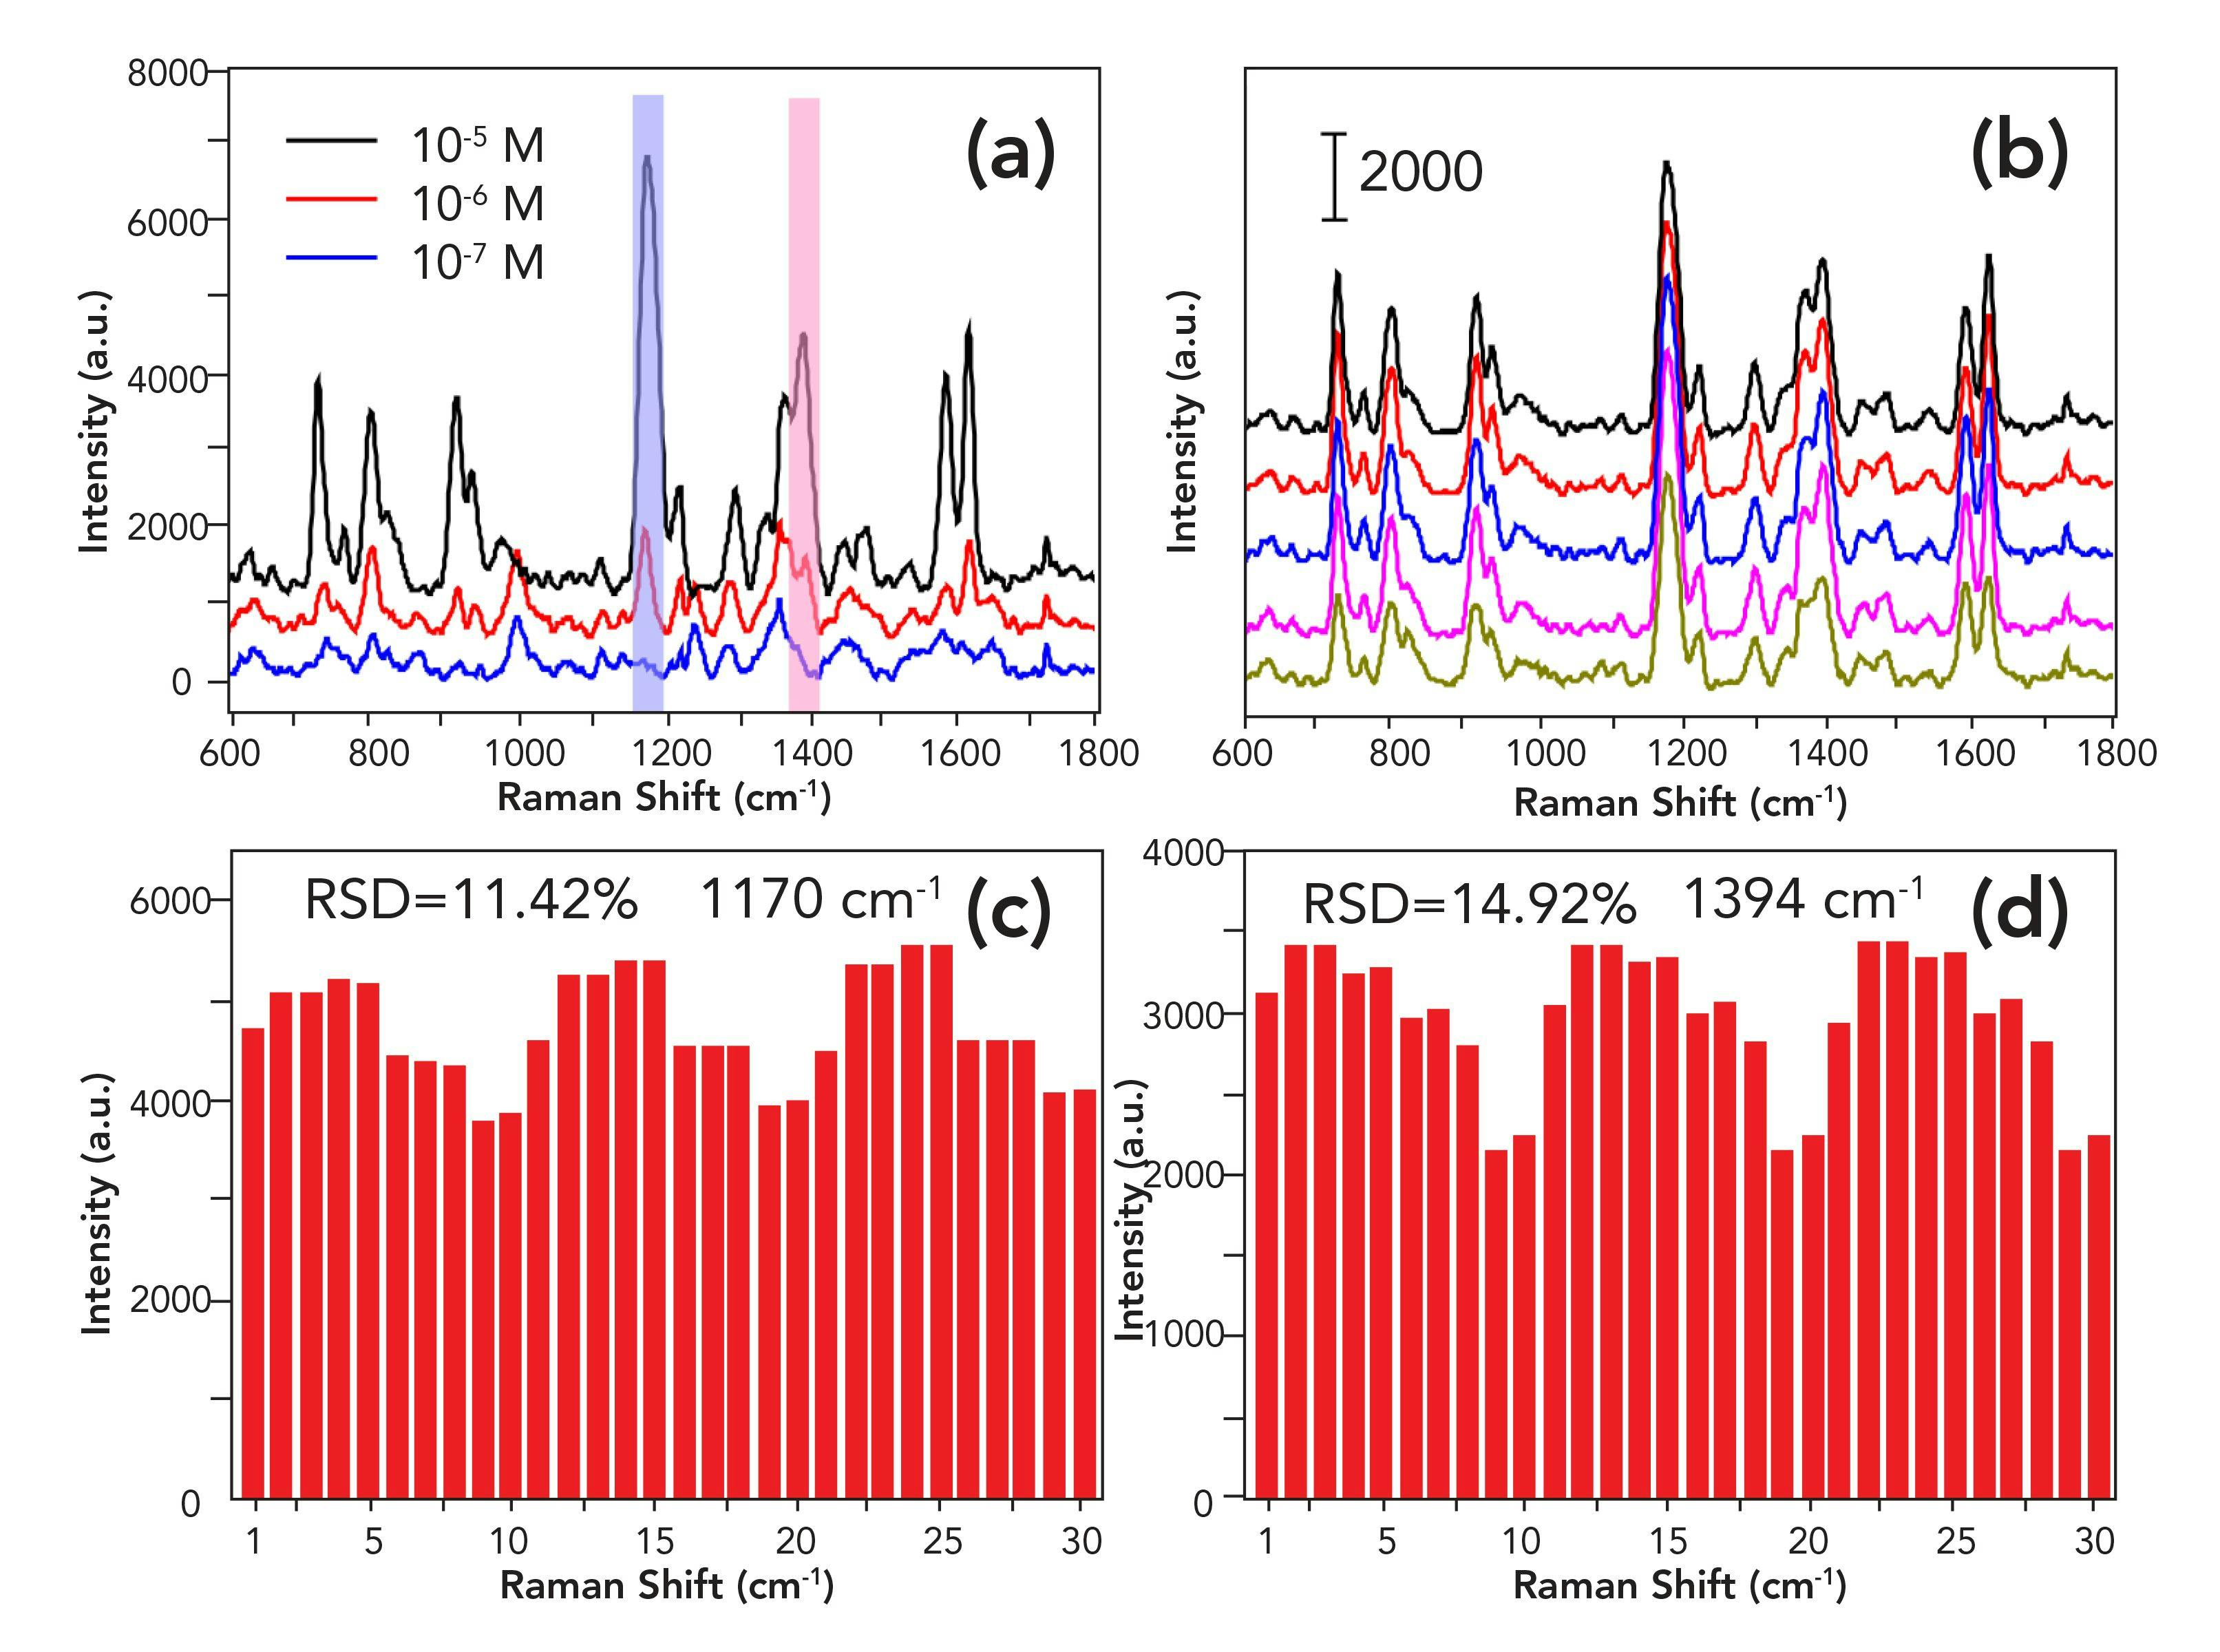 FIGURE S1: Detection of MG standard solution using E1 gold nanoparticles as a substrate. (a) SERS spectra of different MG concentrations. (b) SERS spectra of 10−5 M for MG from five independent SERS measurements. (c) and (d) show the intensities of MG solution (at 10−5 M) in the 30 spots SERS line-scan spectra collected on the substrate at 1170 cm-1, and 1394 cm-1, respectively.